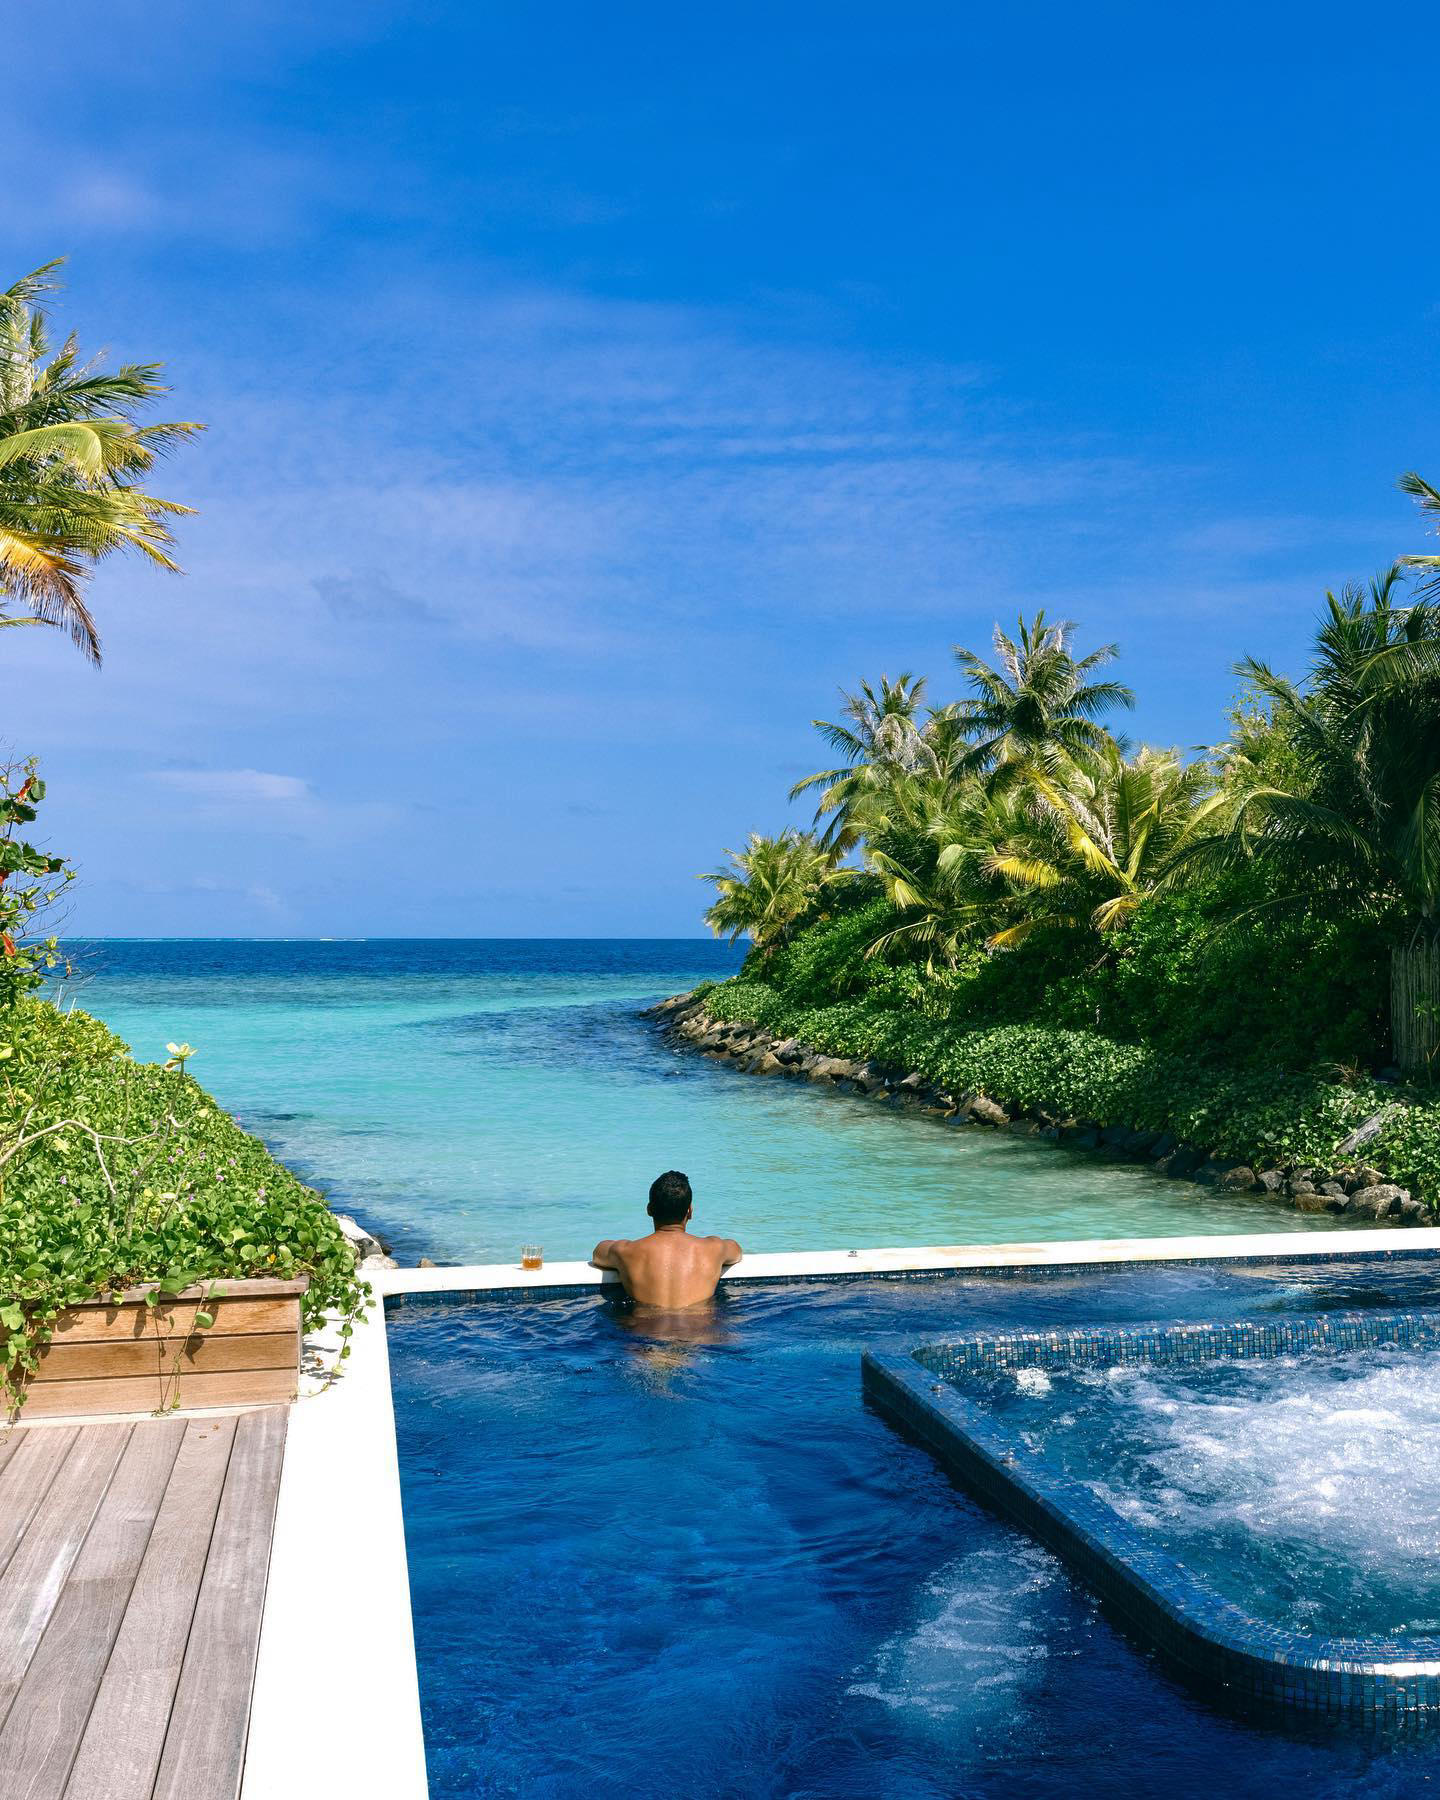 Waldorf Astoria Maldives - Slow down the pace with a heavenly hydrotherapy session at our Aqua Welln